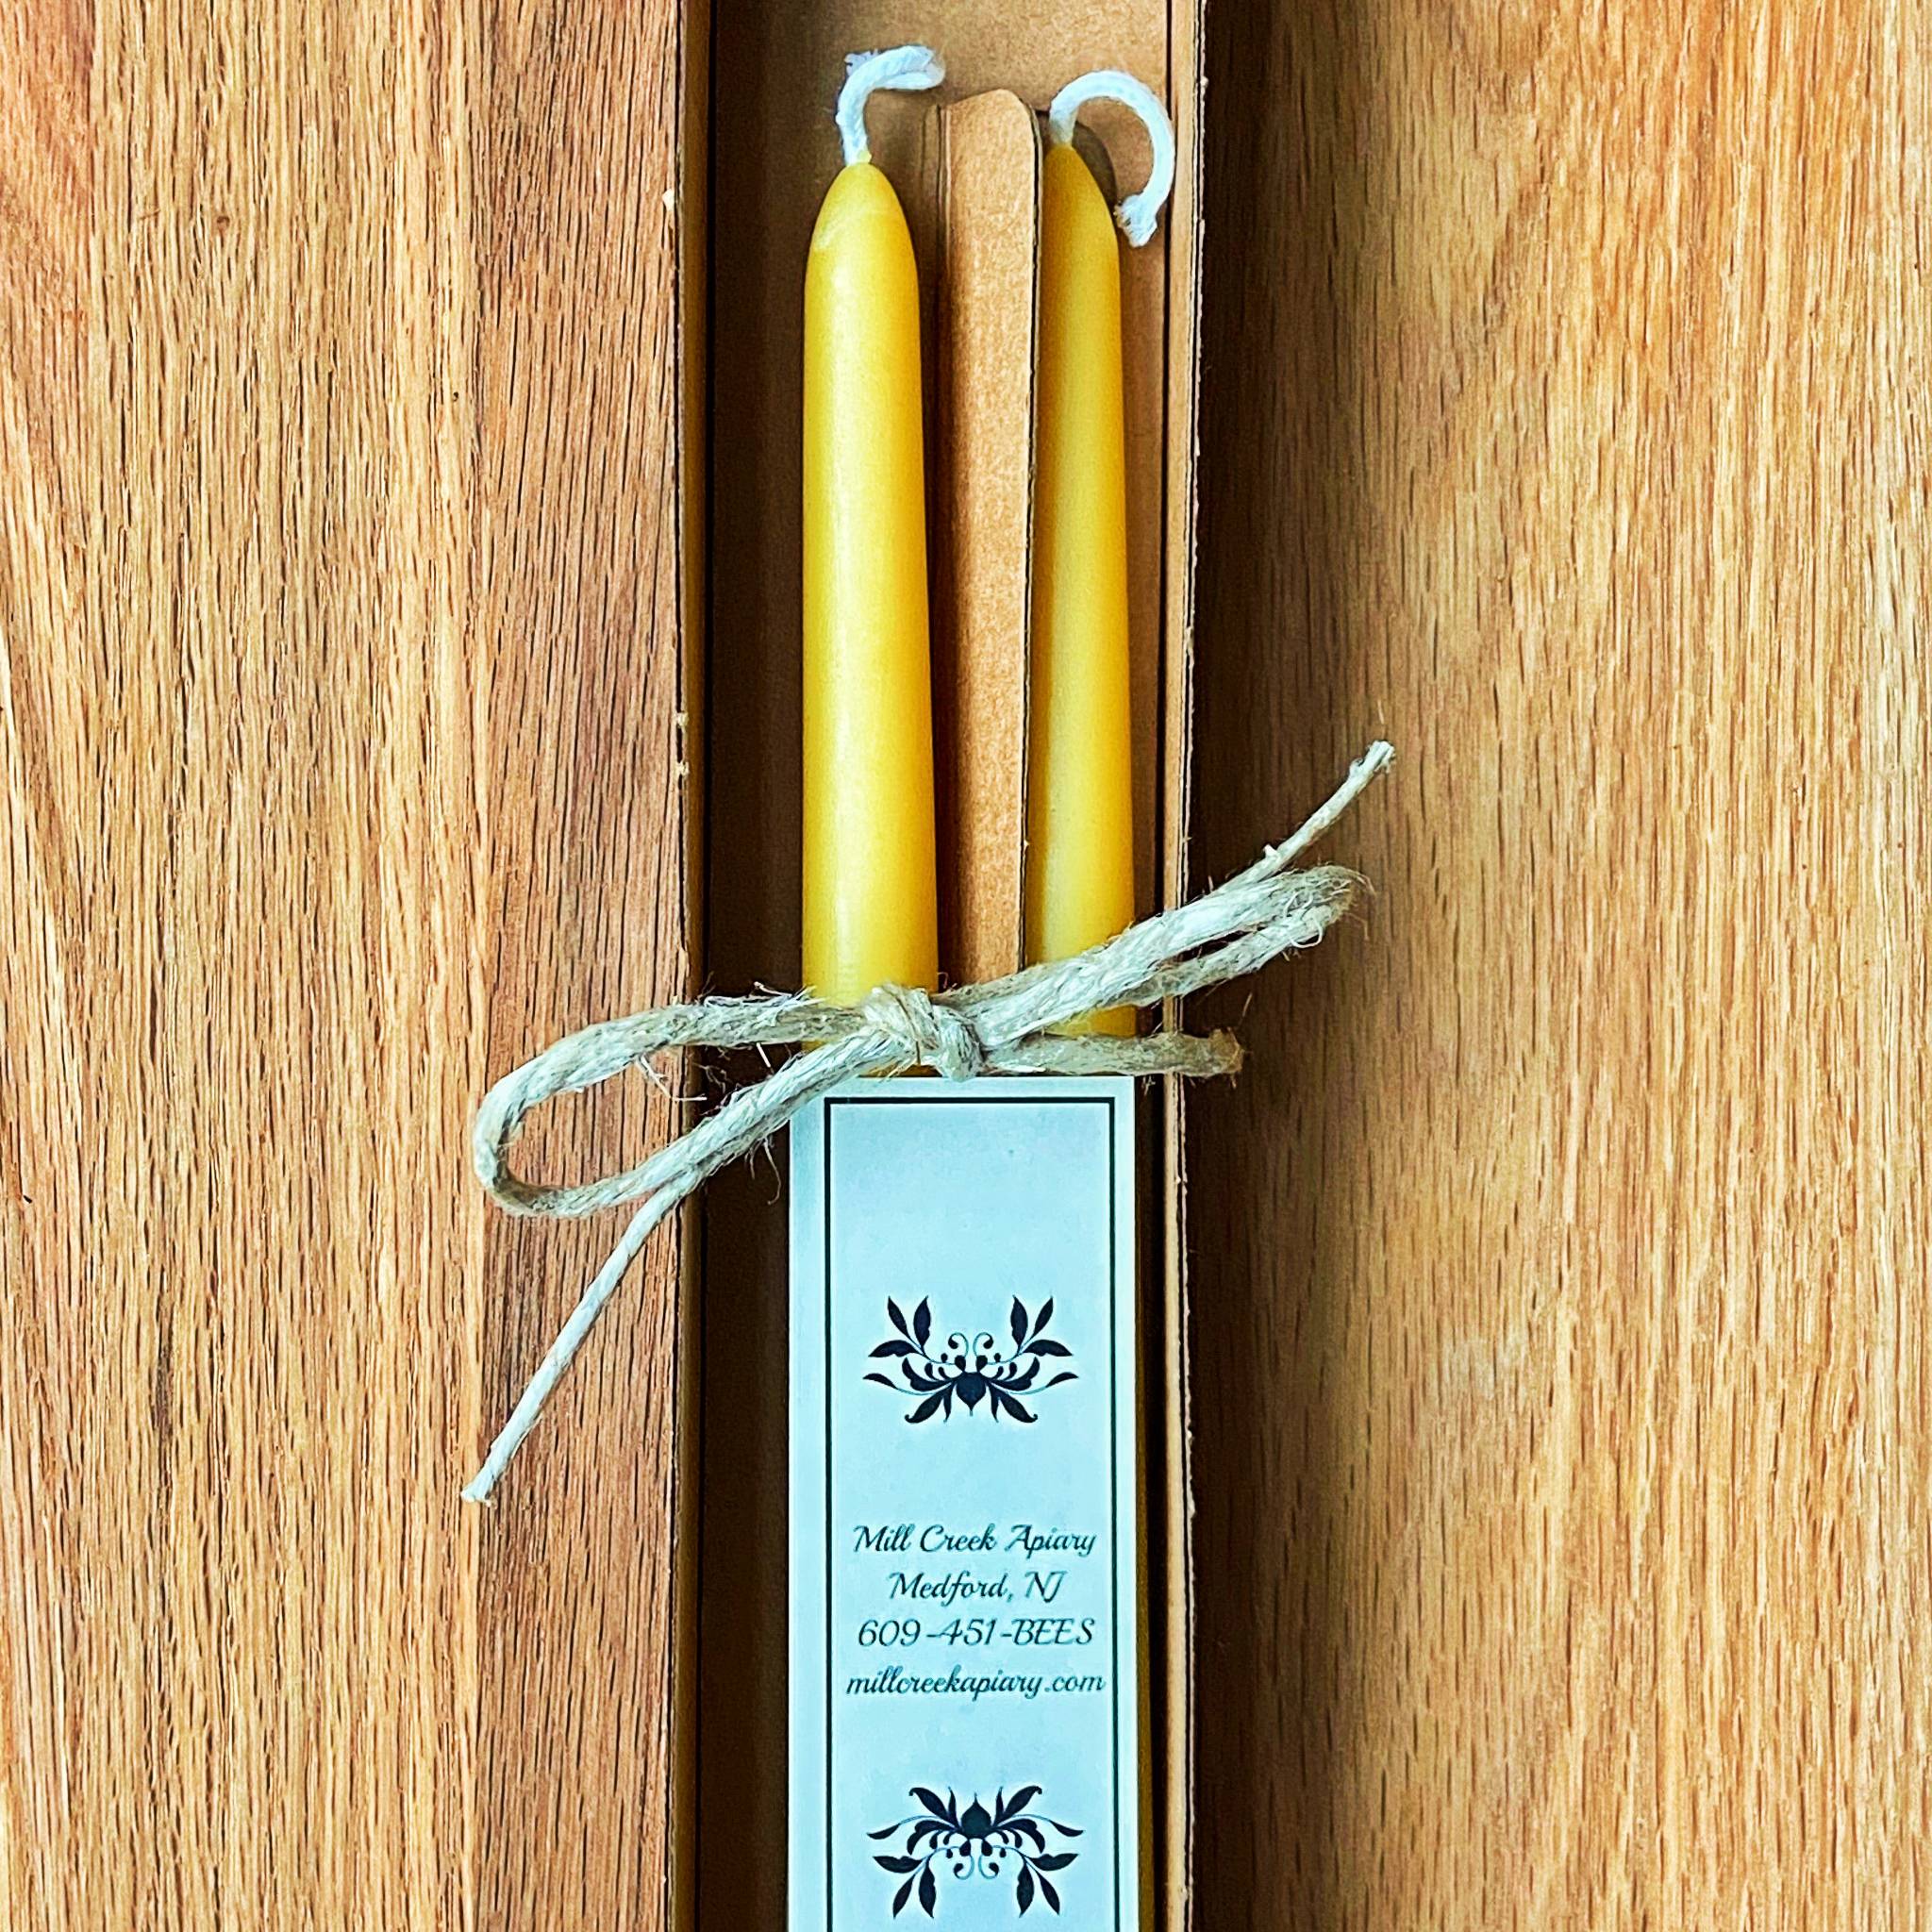 10" taper candles from Mill Creek Apiary